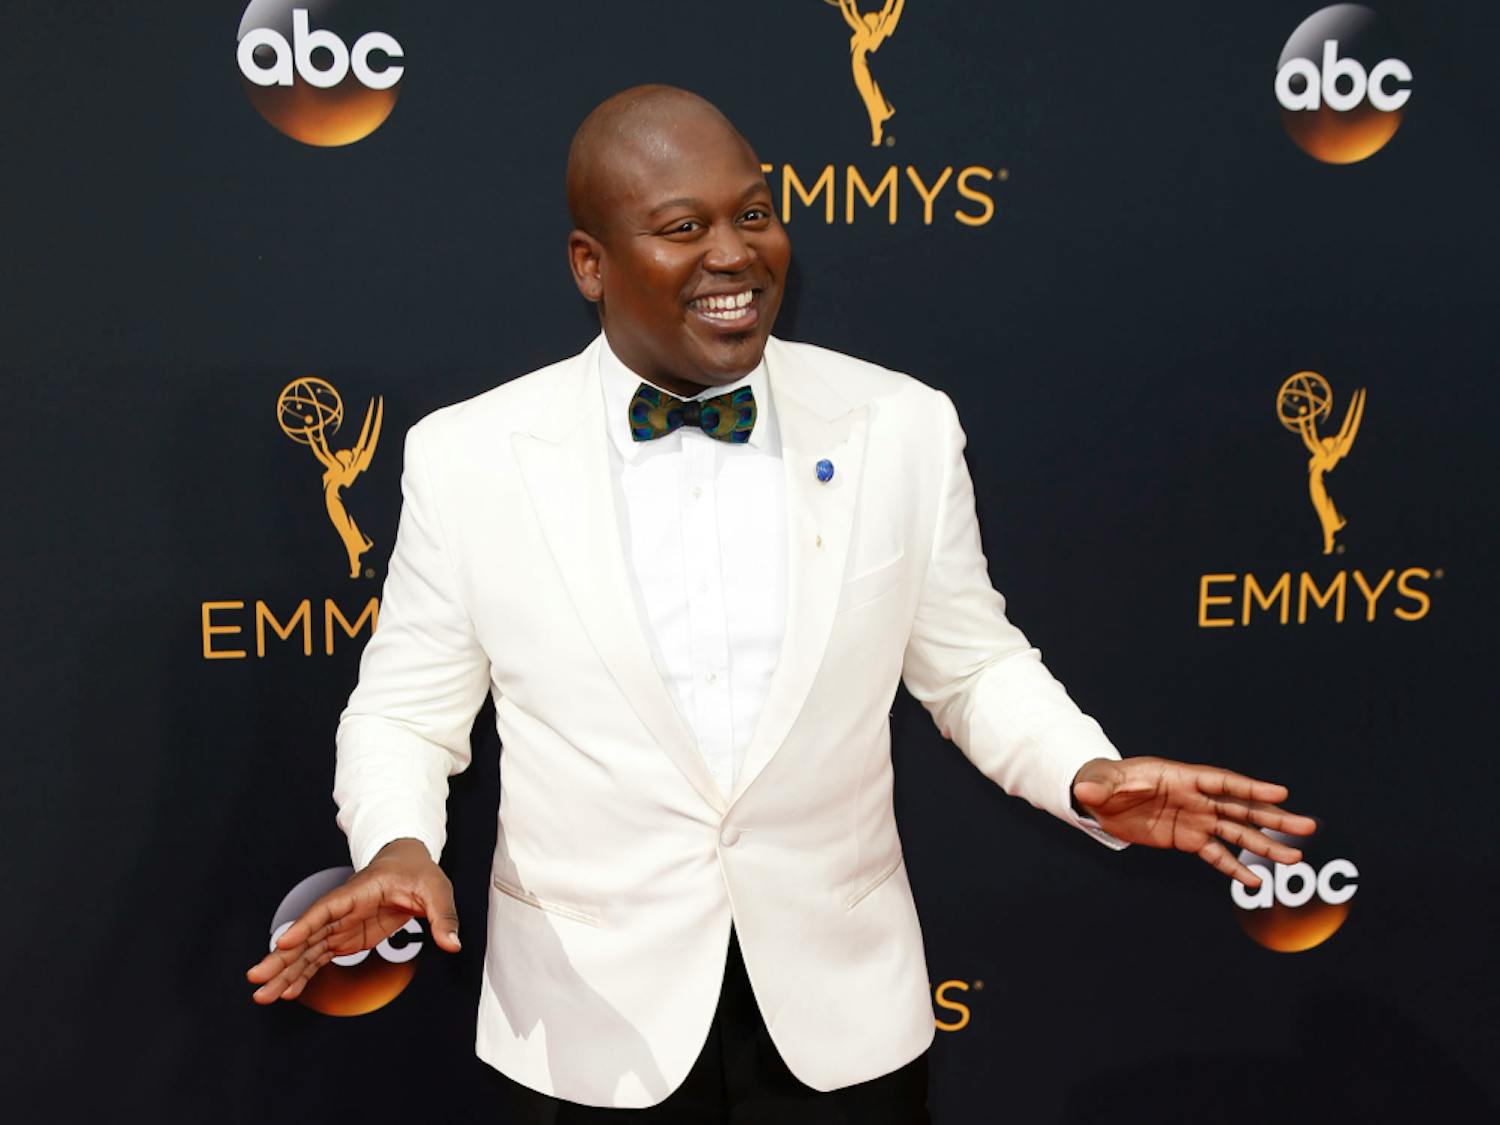 Tituss Burgess arrives at the 68th Primetime Emmy Awards at the Microsoft Theater in Los Angeles on Sunday, Sept. 18, 2016.